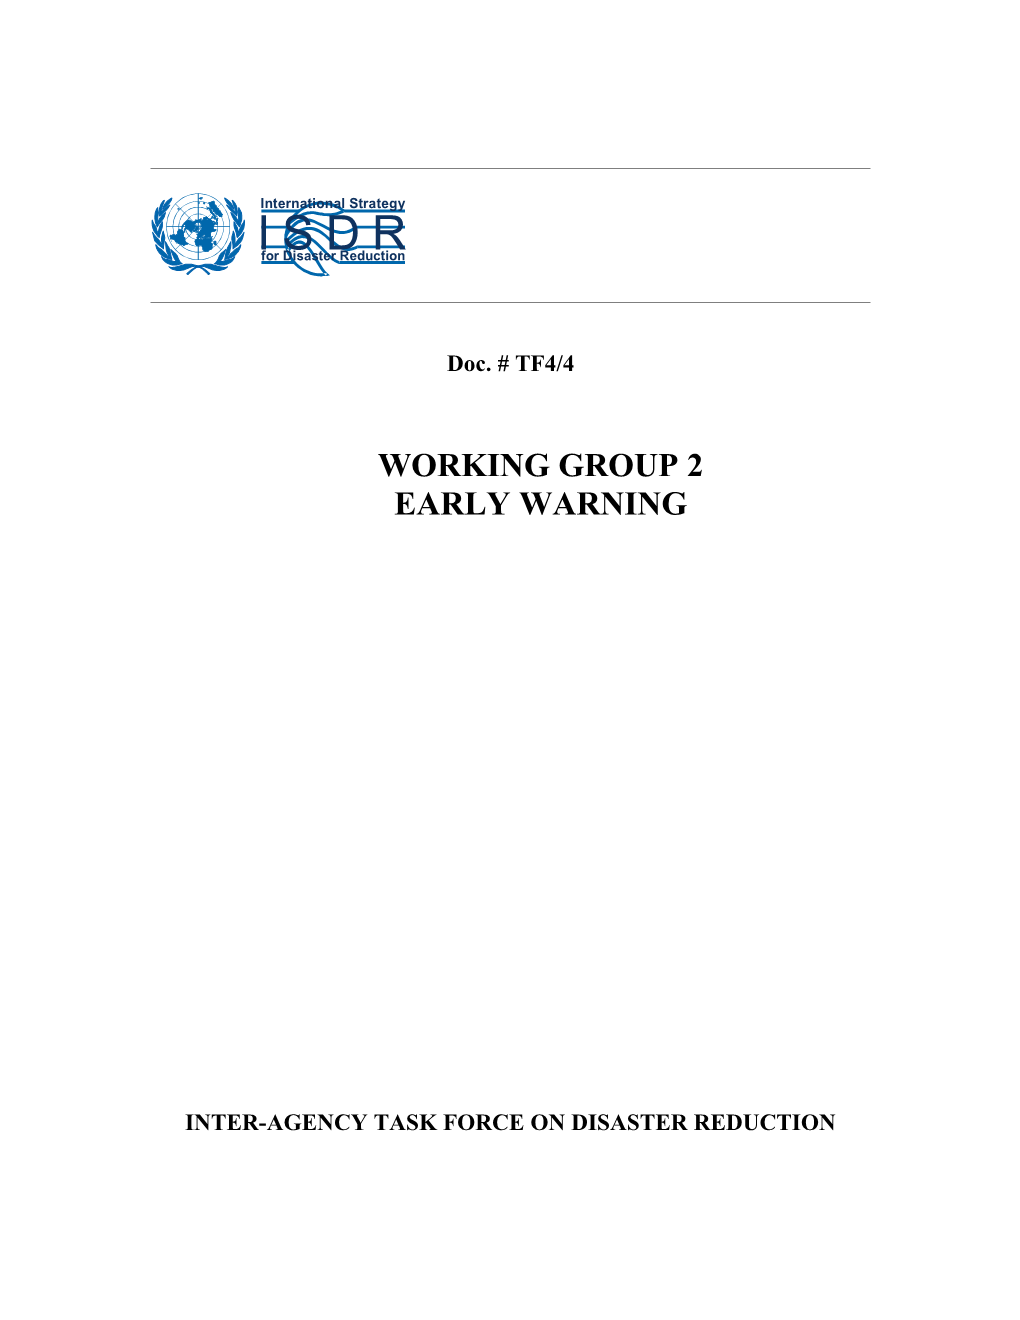 Report of the Working Group 2 - Early